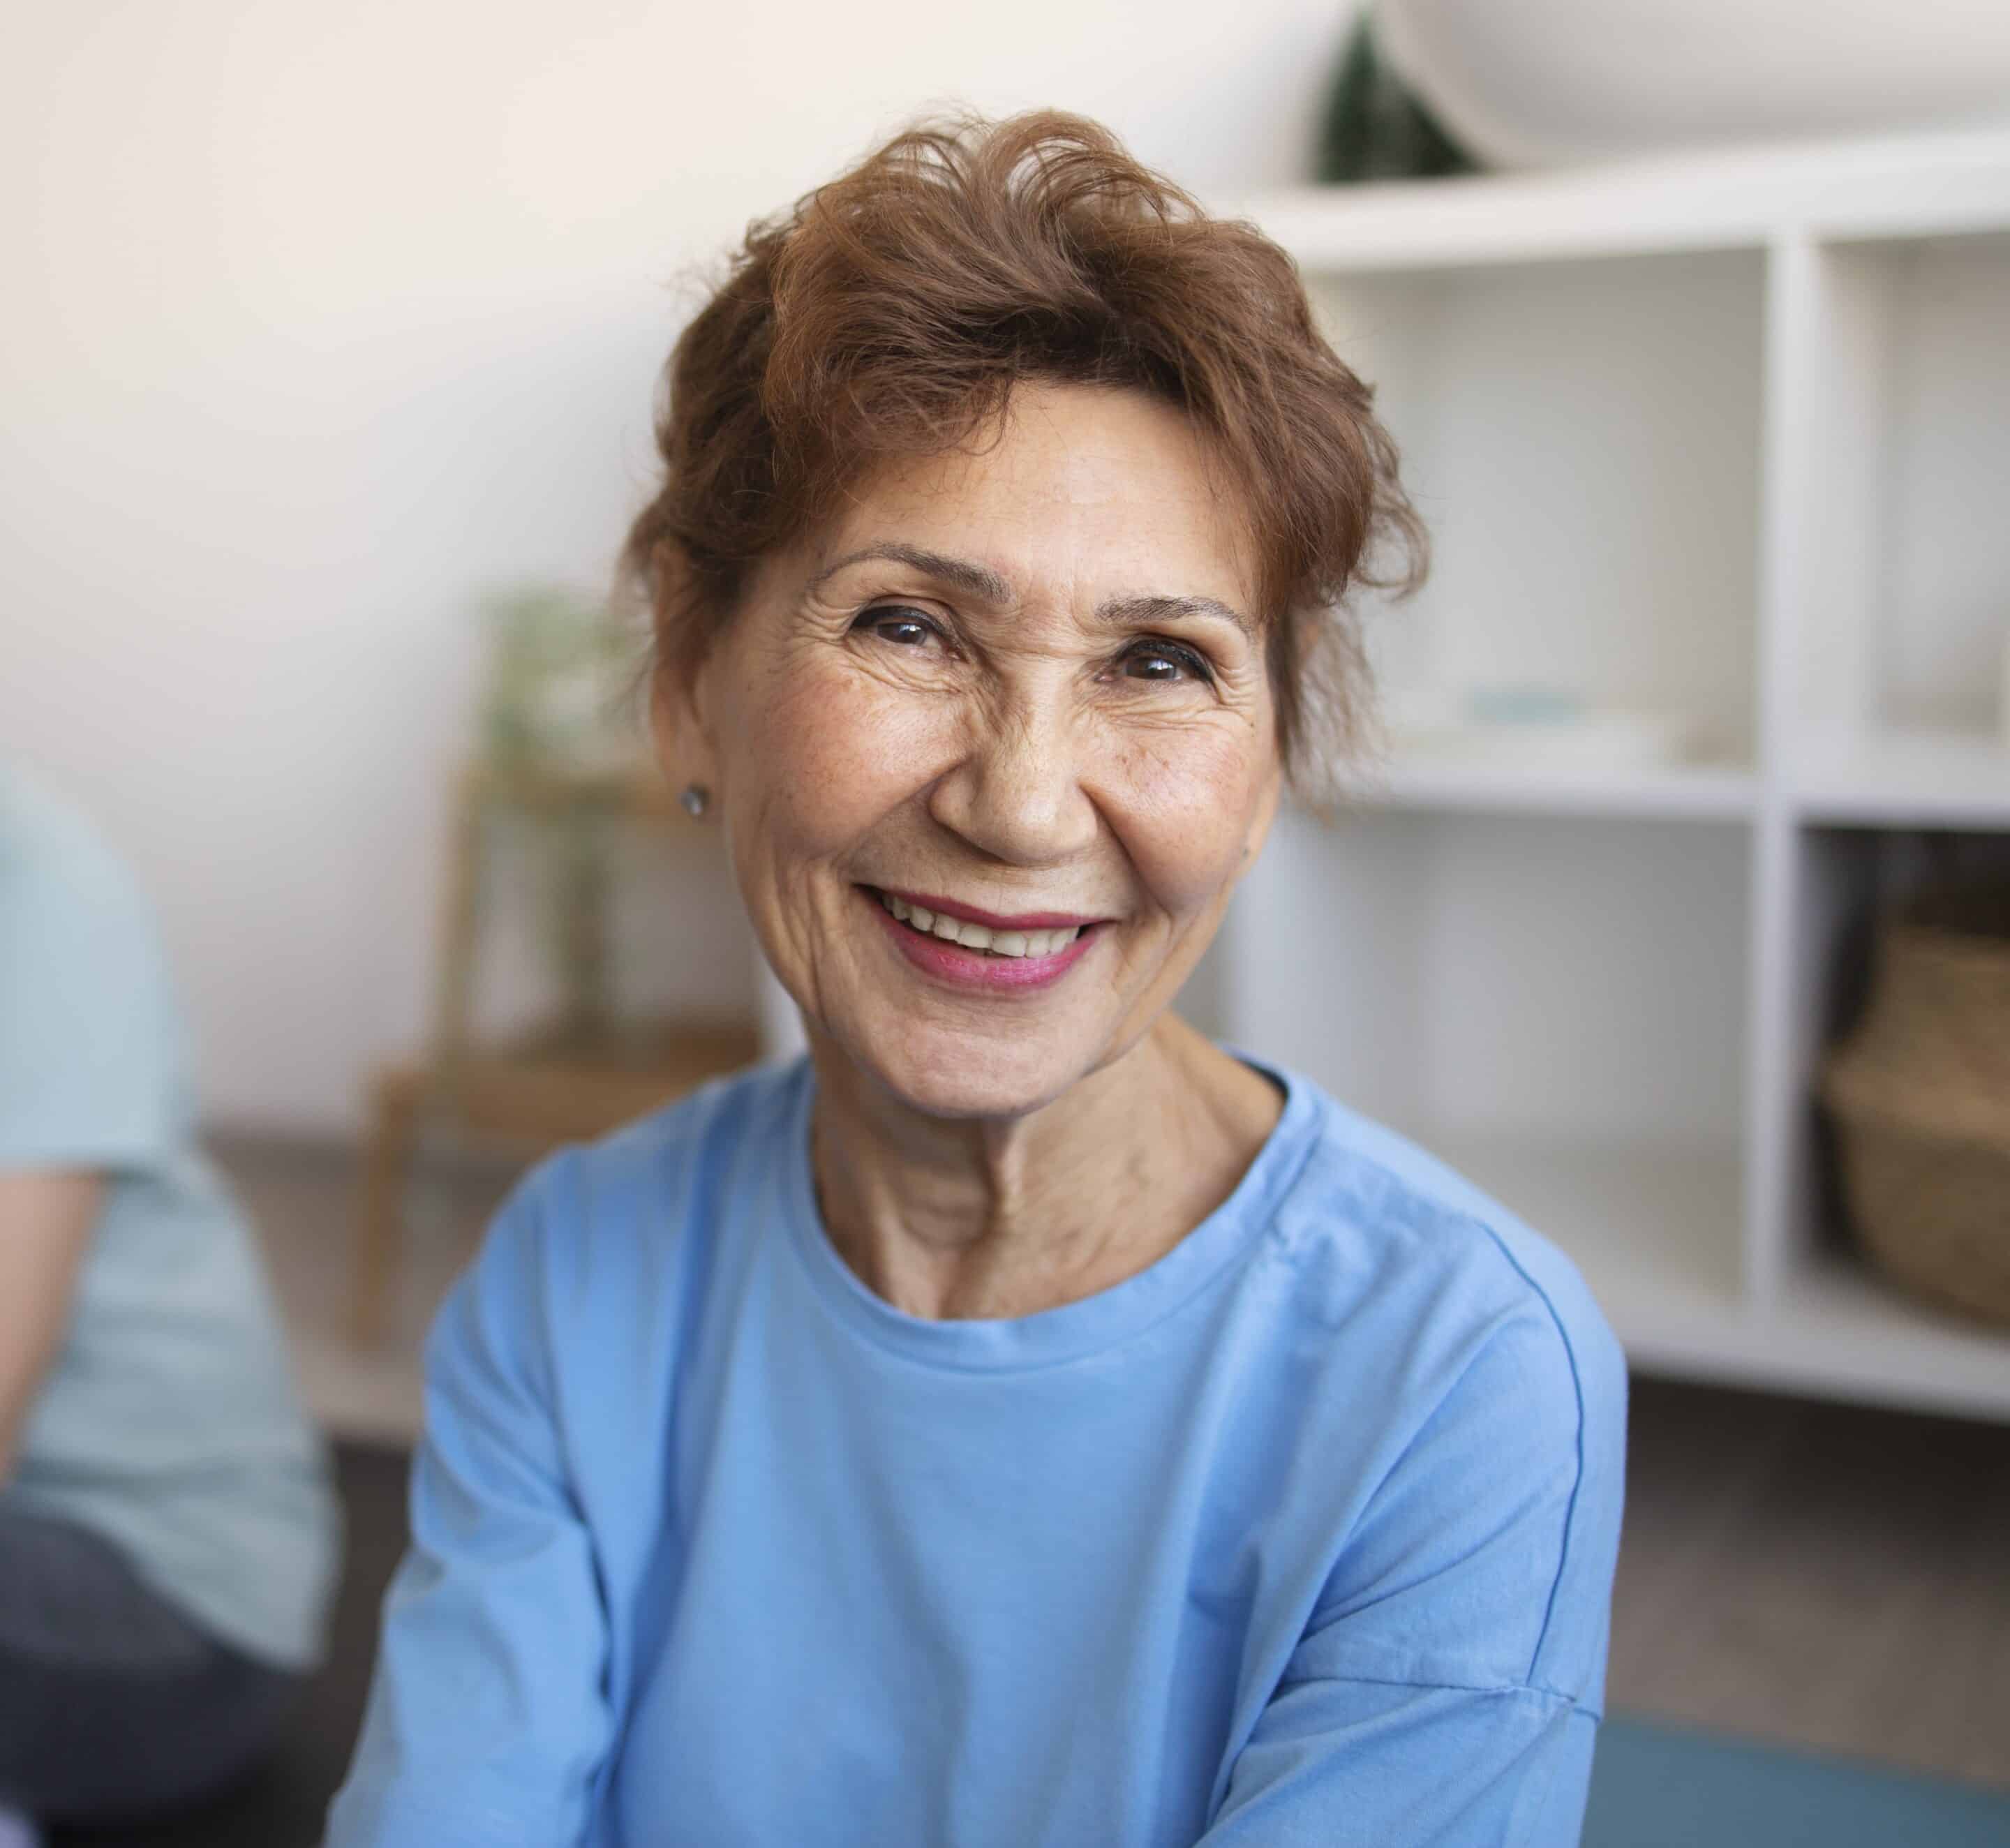 How much does a nursing home cost in Australia